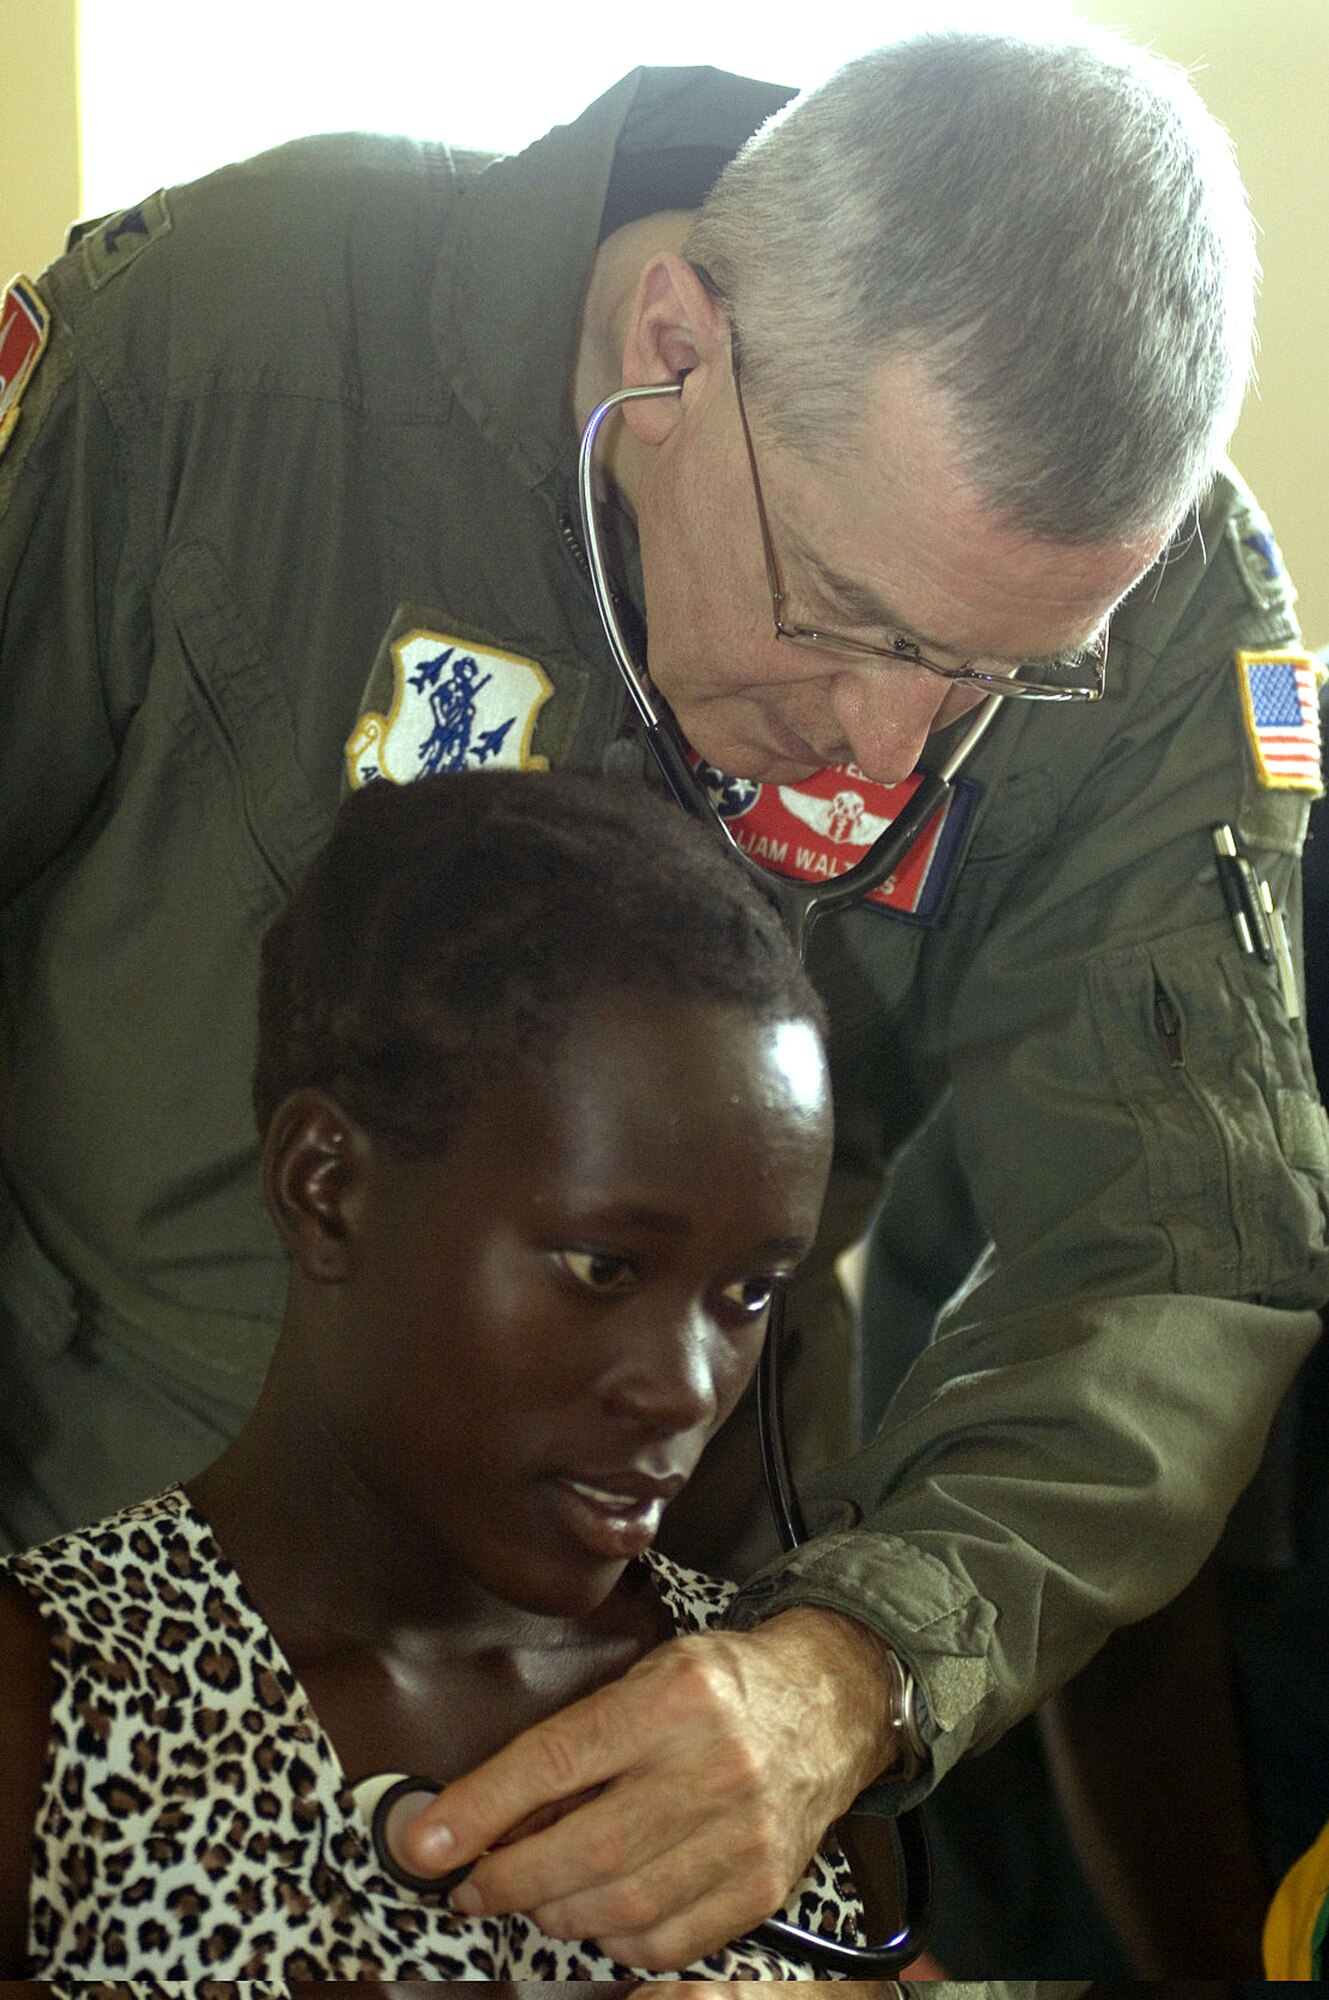 Dr. (Col.) William Walters listens to the lungs of a Ugandan patient during the training exercise Natural Fire 2006 in Soroti, Uganda, on Aug. 8. Colonel Walters is with the Tennessee Air National Guard and is helping provide medical civil assistance. (U.S. Air Force photo/Master Sgt. John E. Lasky) 

